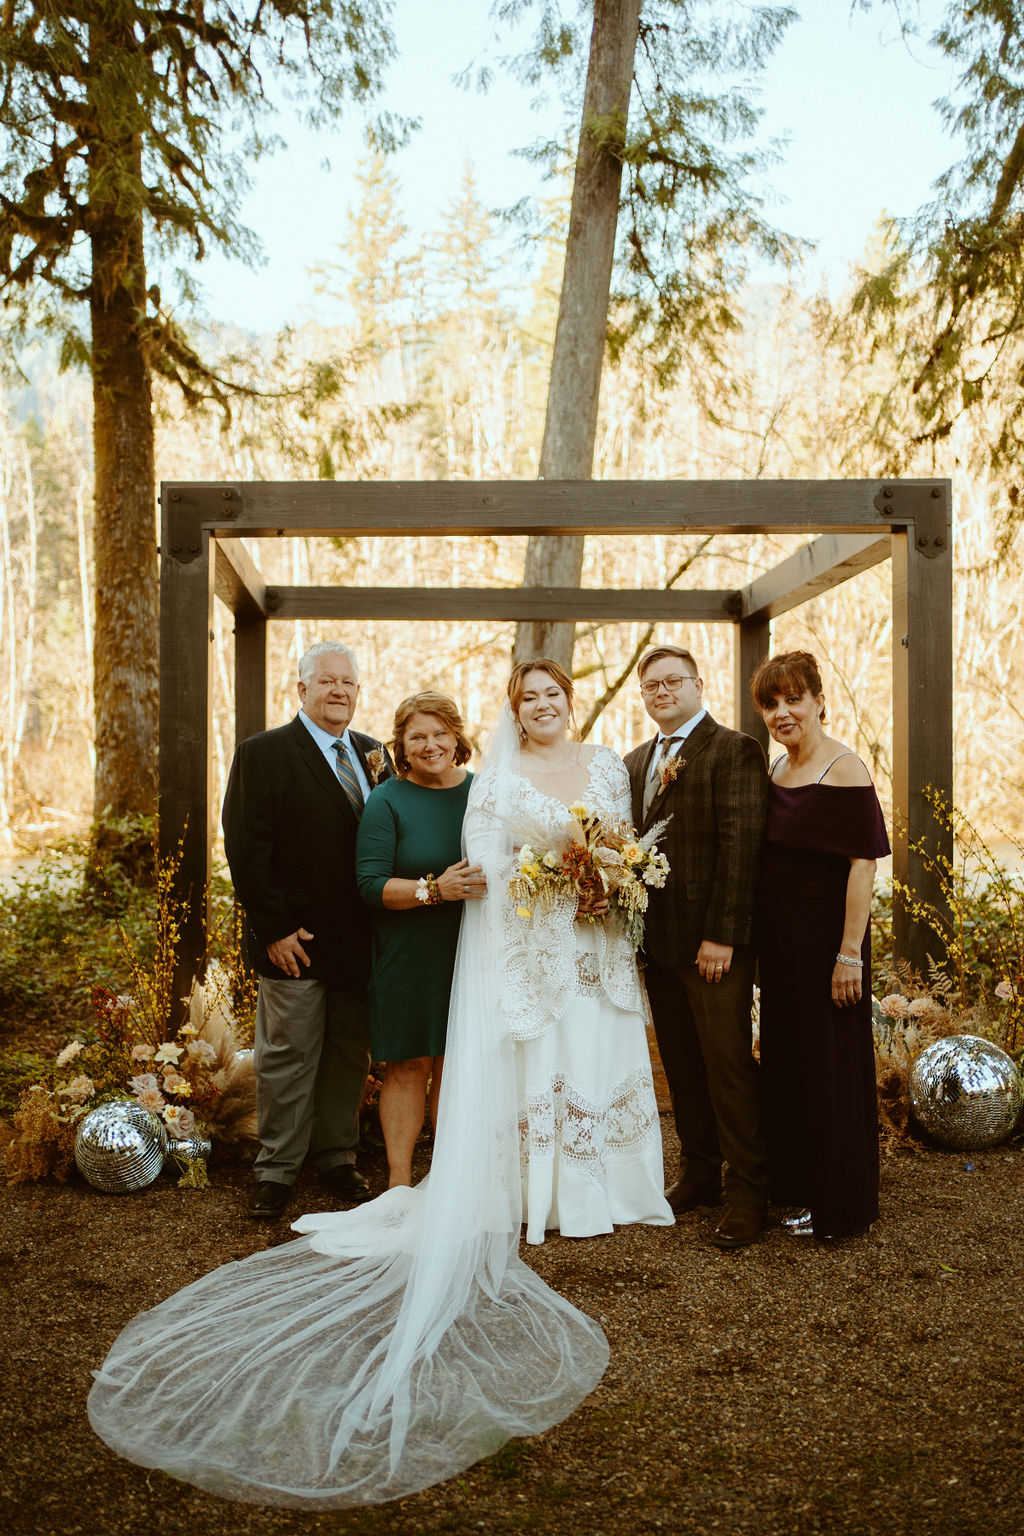 The bride and groom pose with mother and father of the bride and mother of the groom in front of the wooden arch